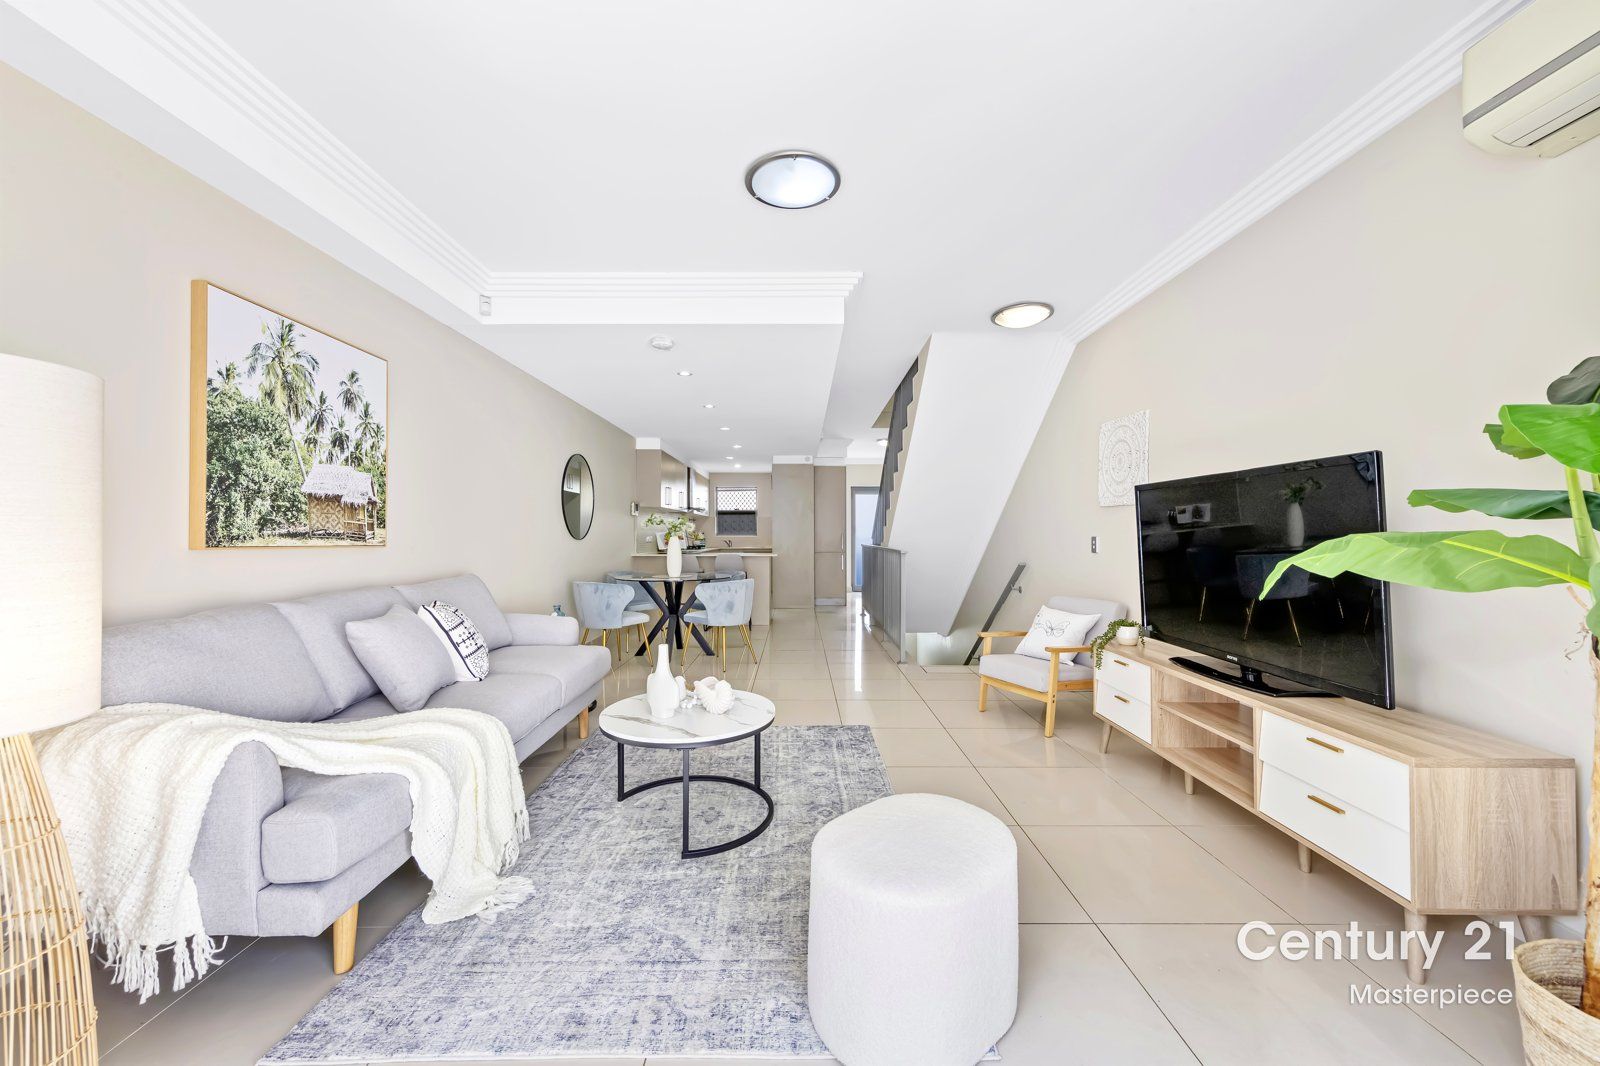 2 bedrooms Apartment / Unit / Flat in 26/45 Forest Road HURSTVILLE NSW, 2220